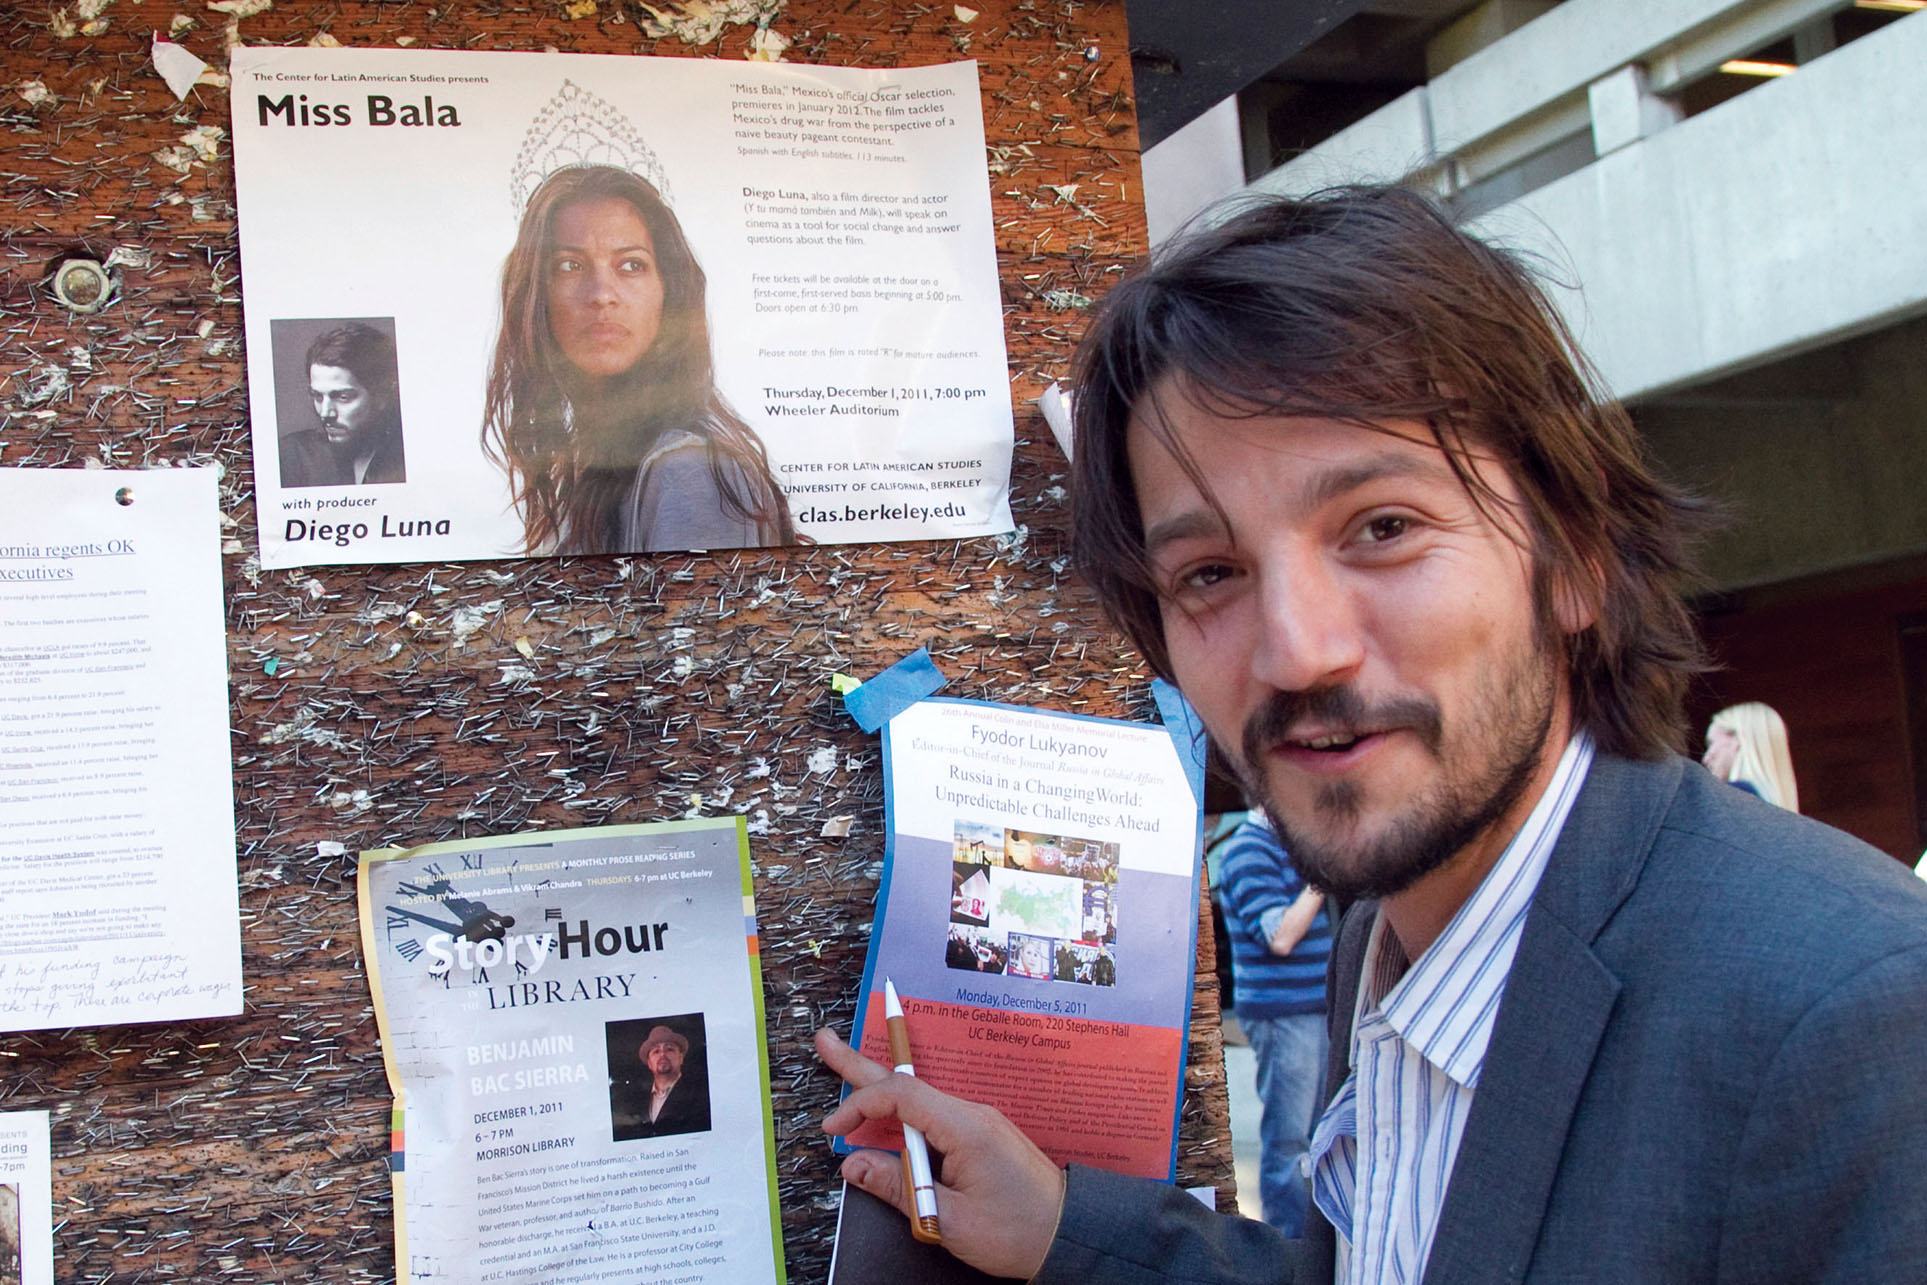 Diego Luna with a poster advertising the "Miss Bala" screening on the Berkeley campus, December 2011. (Photo by Jim Block.)